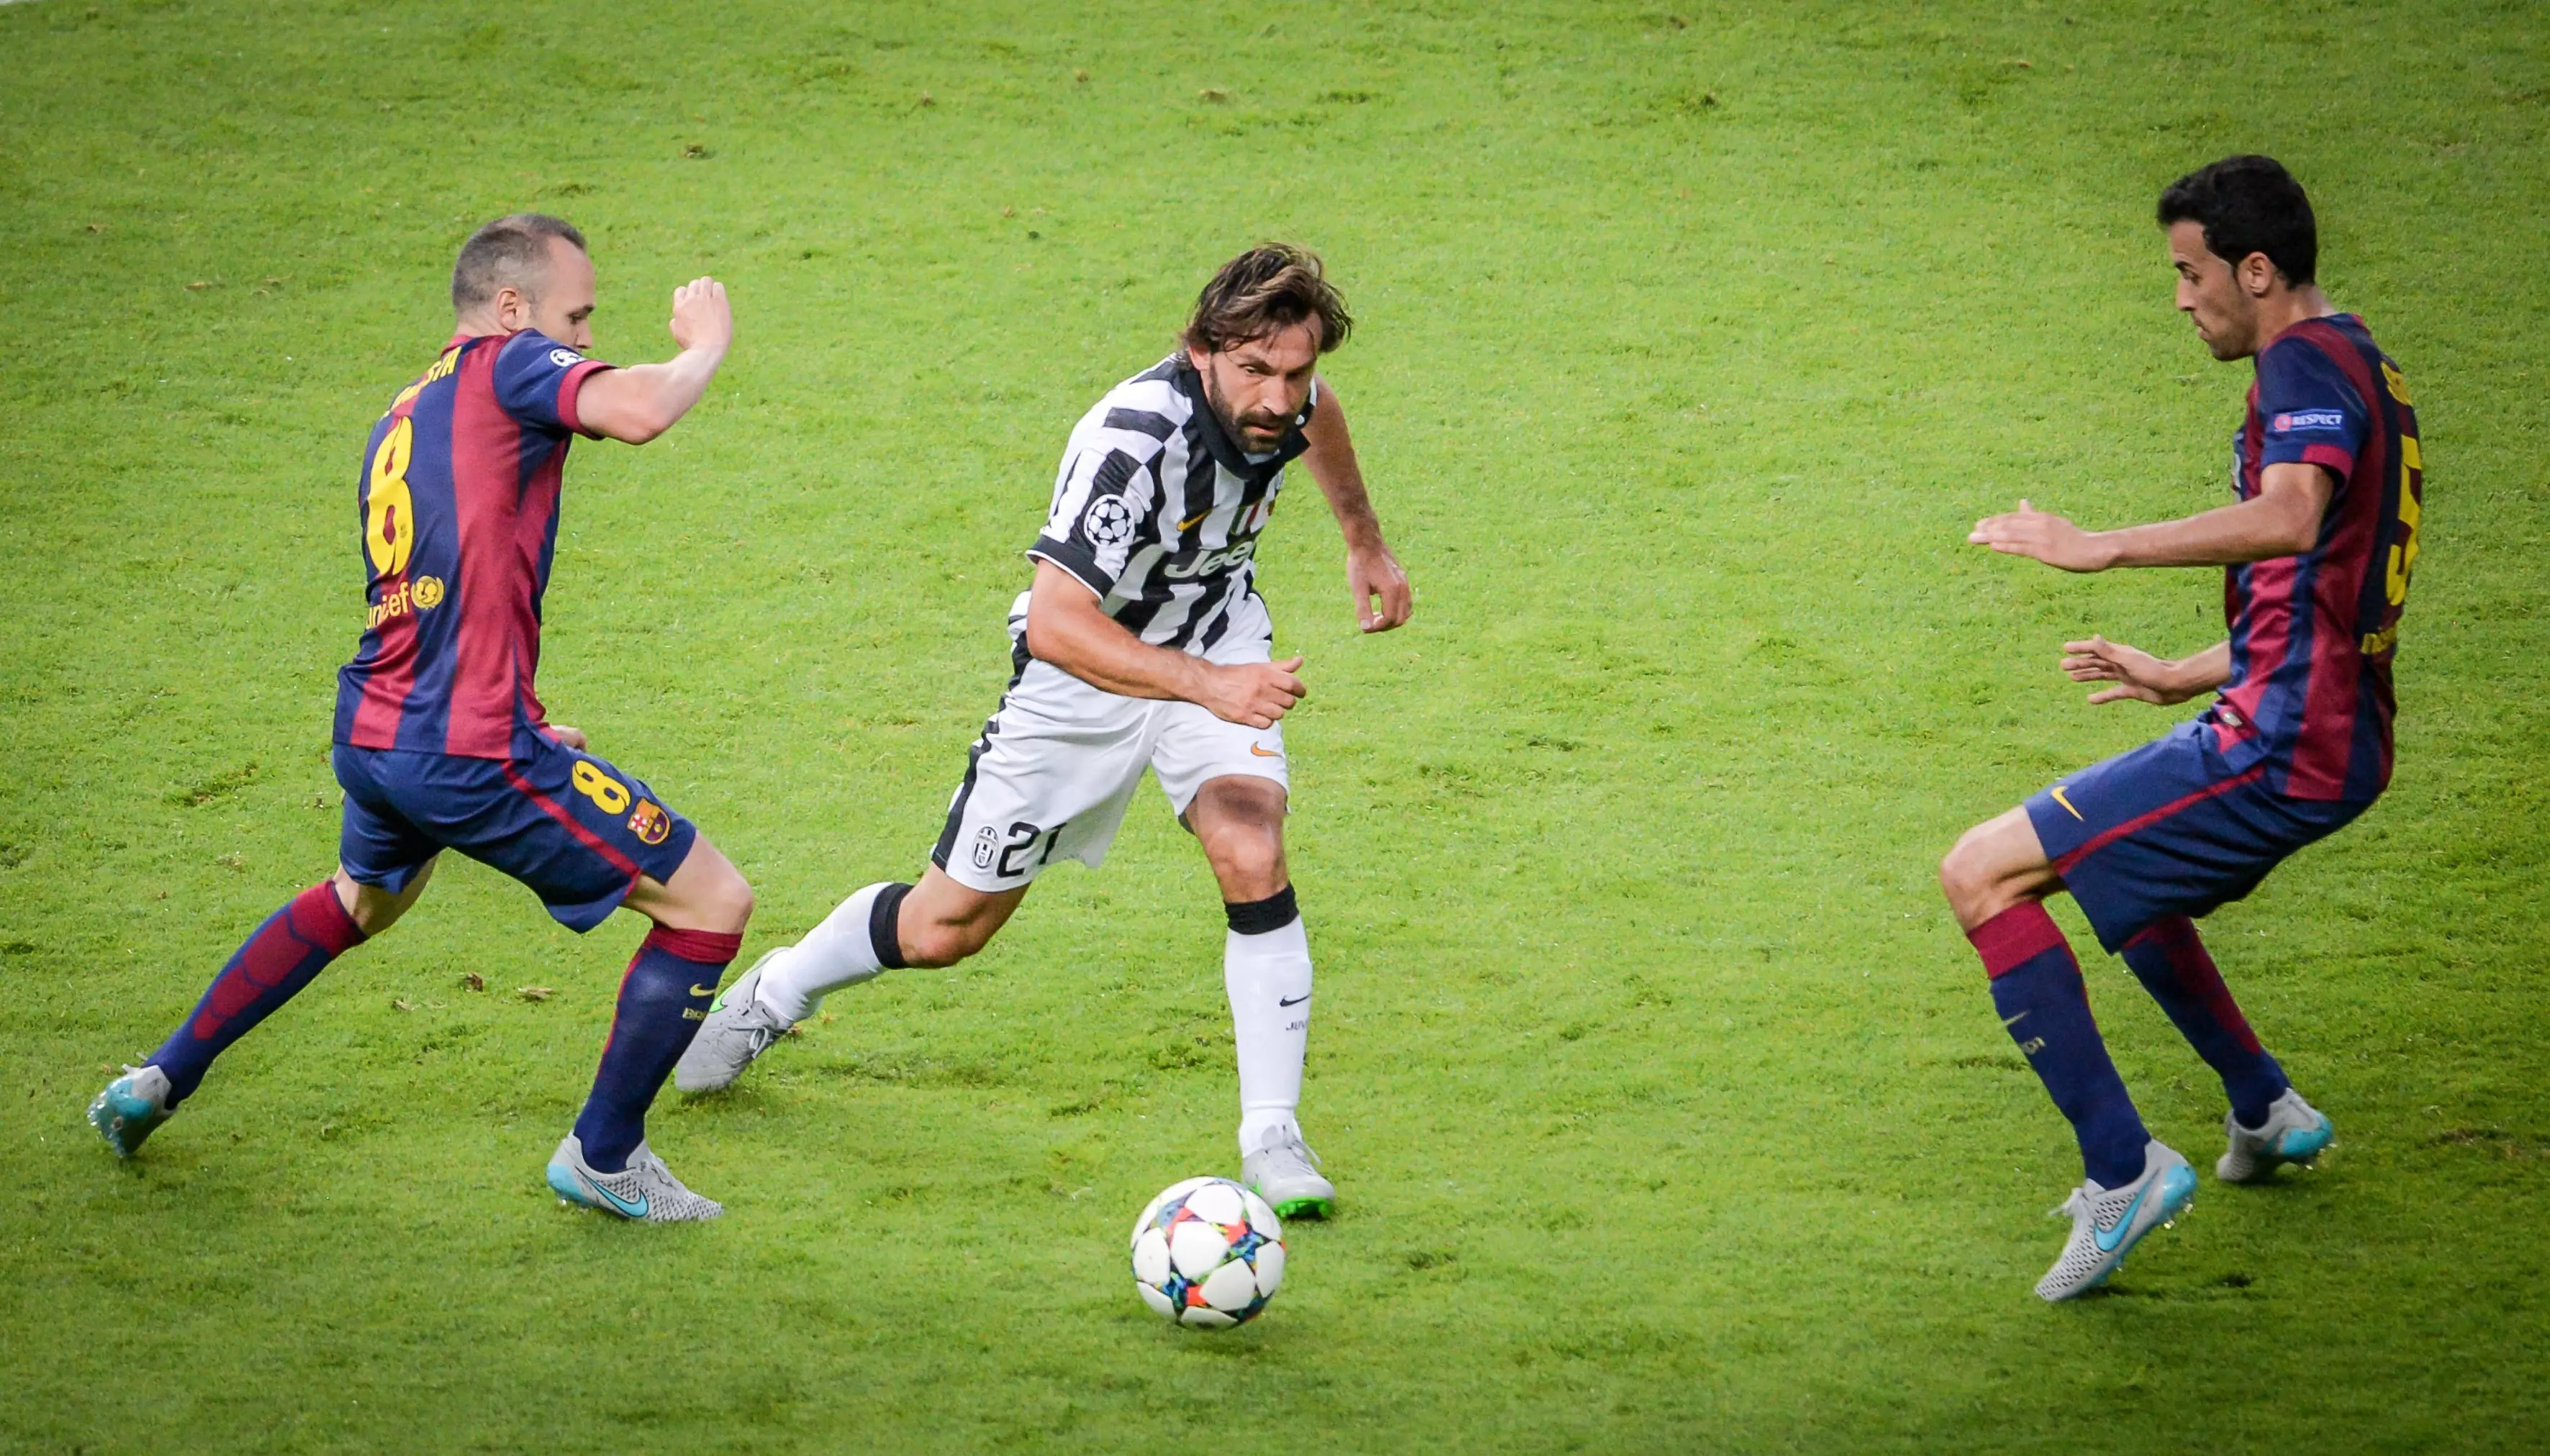 If only Pogba would understand he isn't Pirlo. Image: PA Images